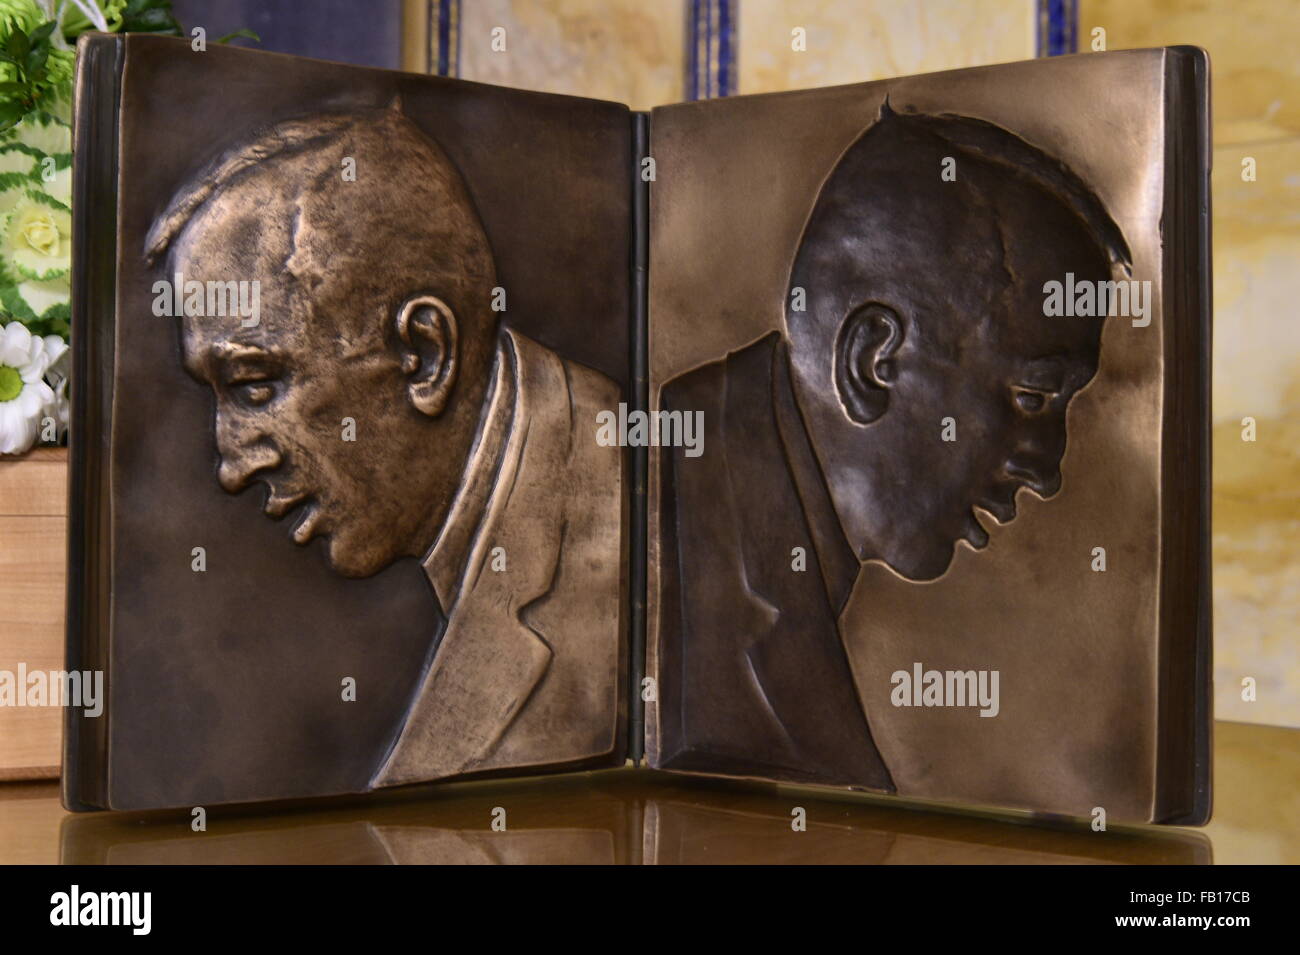 Presentation of Karel Capek prize (pictured) annually awarded by Stock  Photo - Alamy